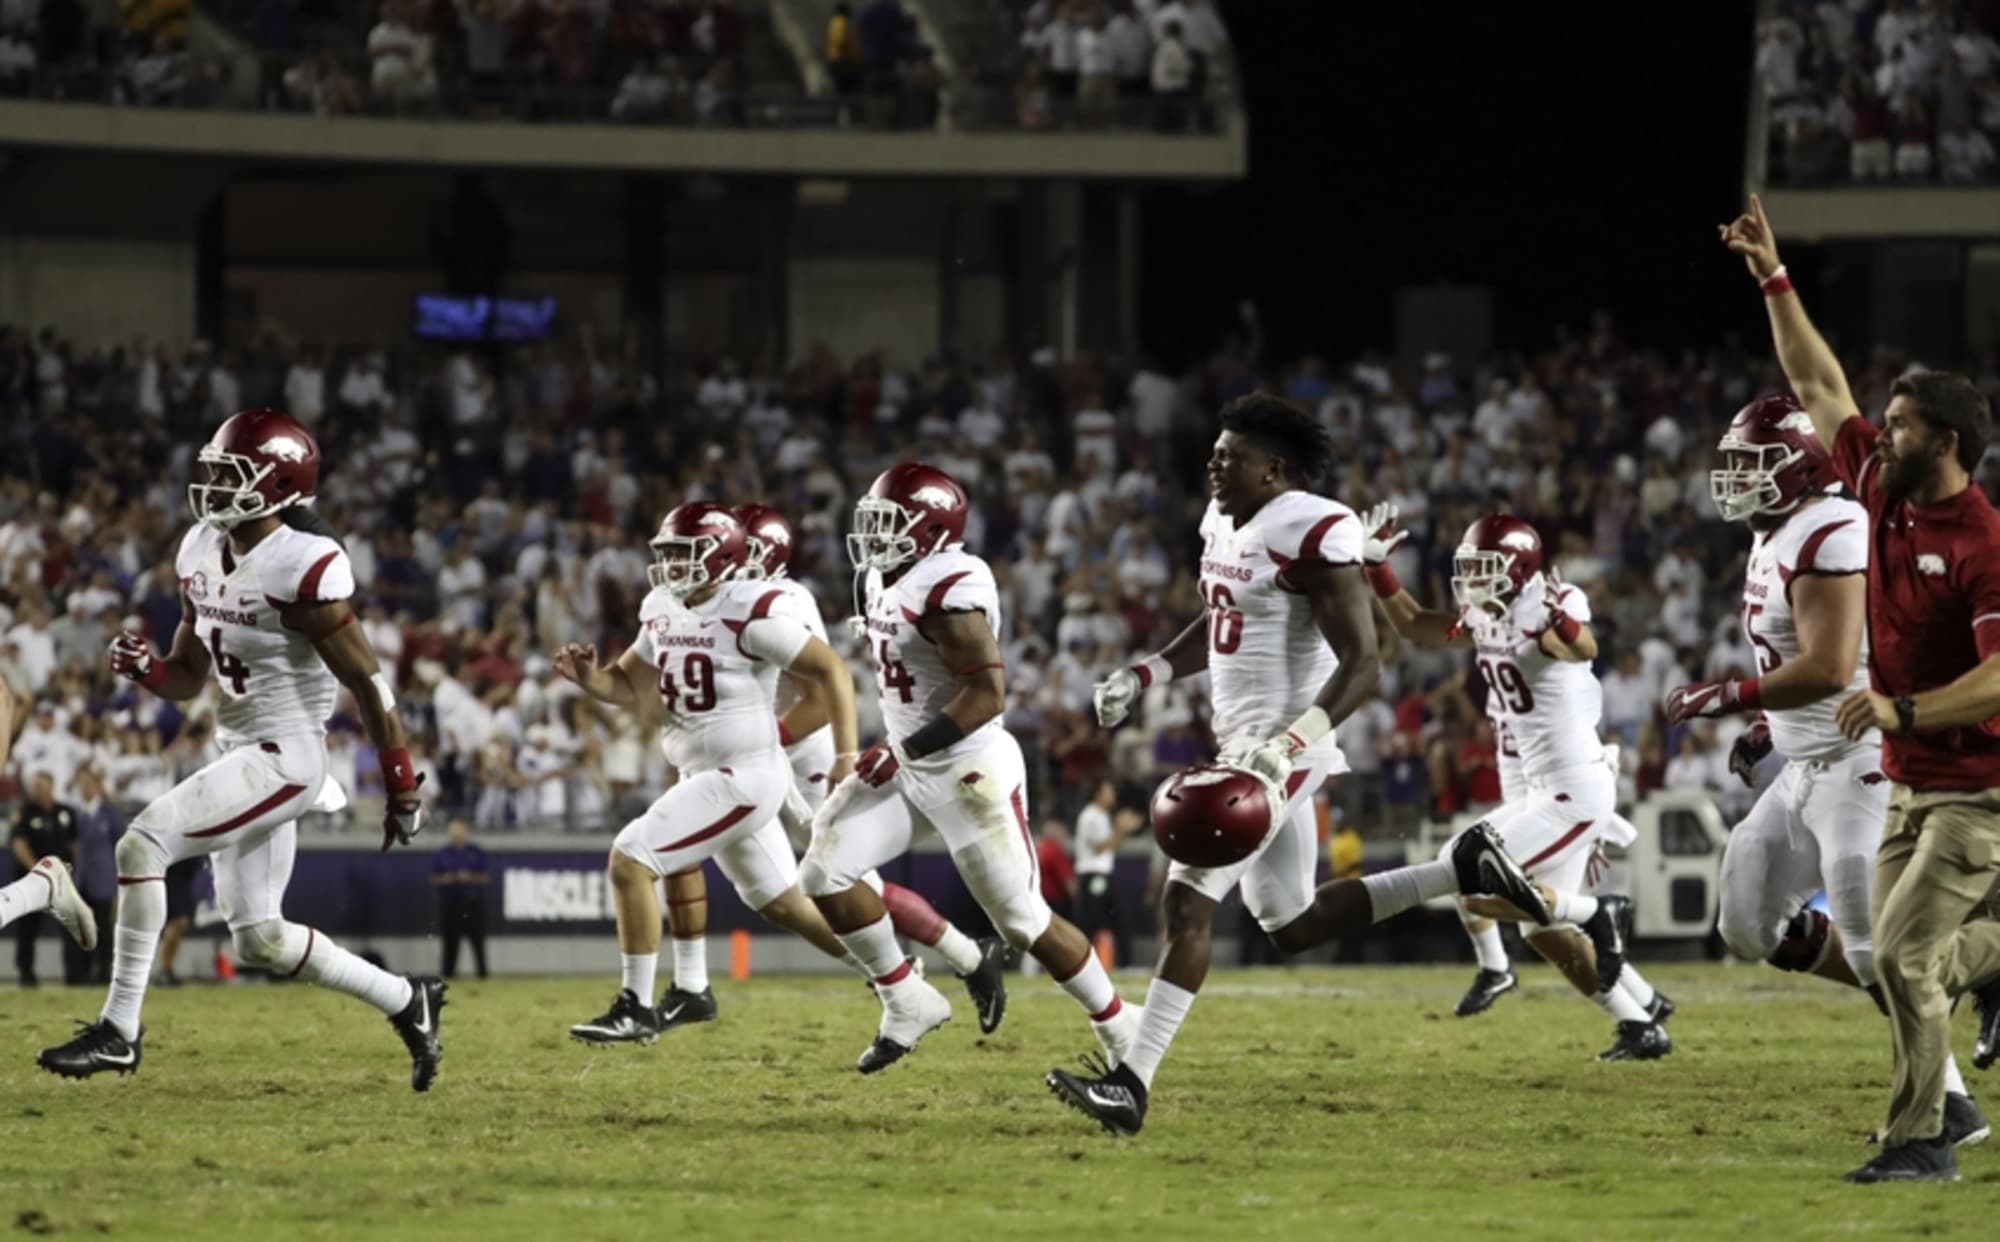 When the Game Against TCU was on the Line, the Hogs Went Allen